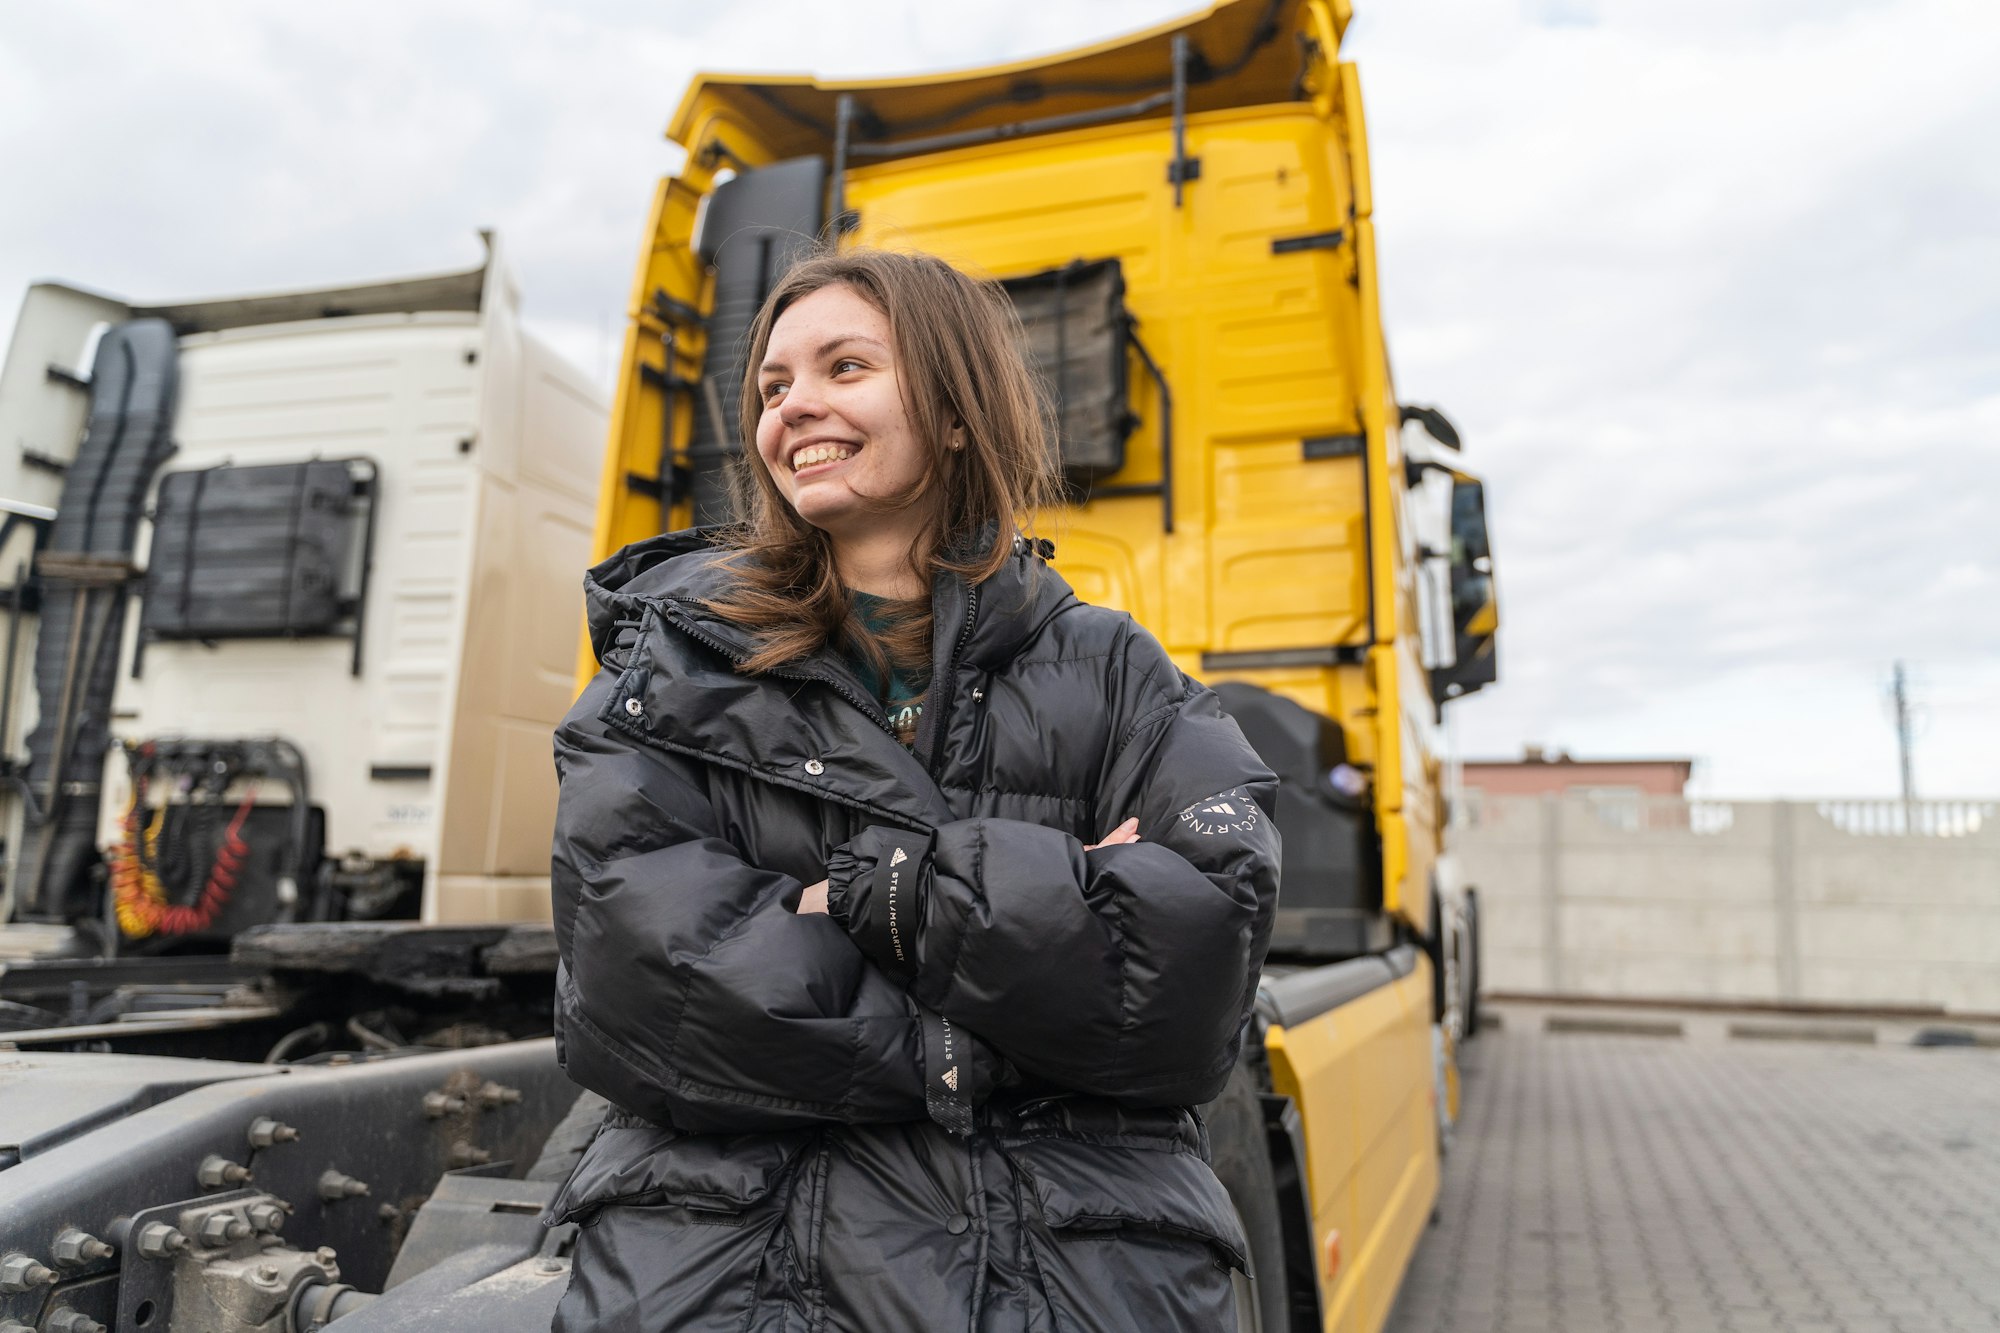 Caucasian young woman driving truck. trucker female worker, transport industry occupation